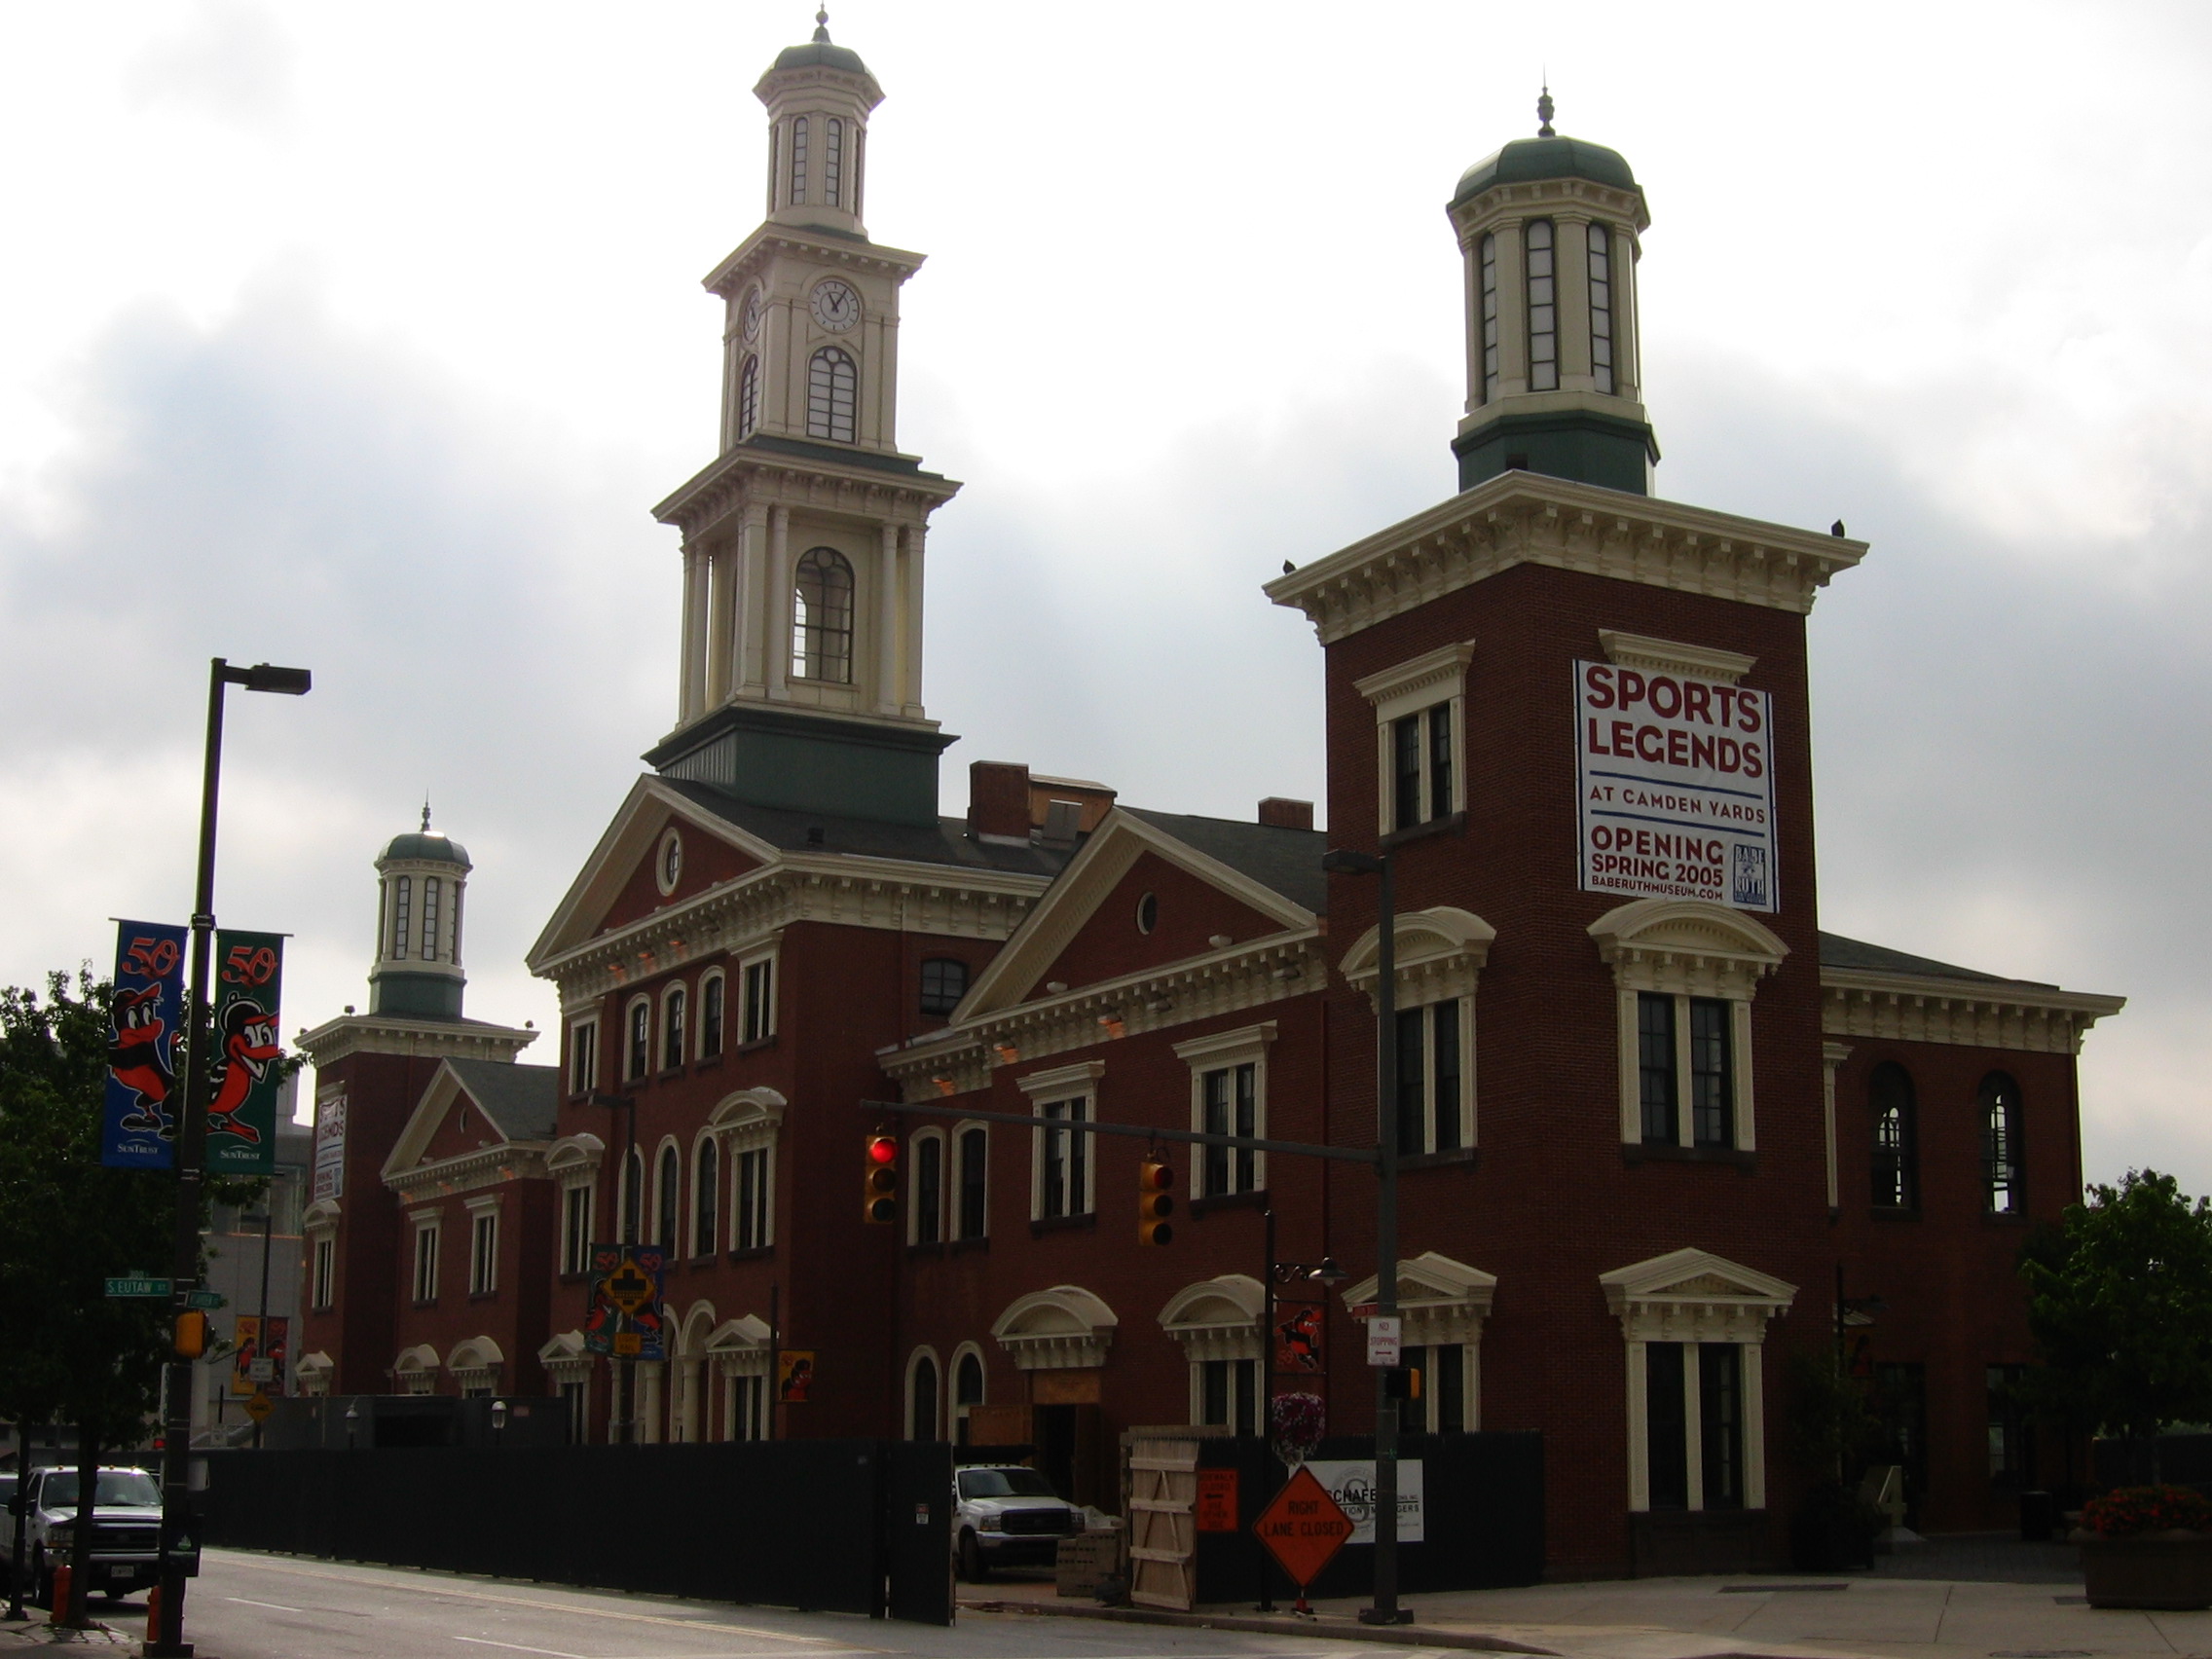 Engineer's Guide to Baltimore: Camden Station